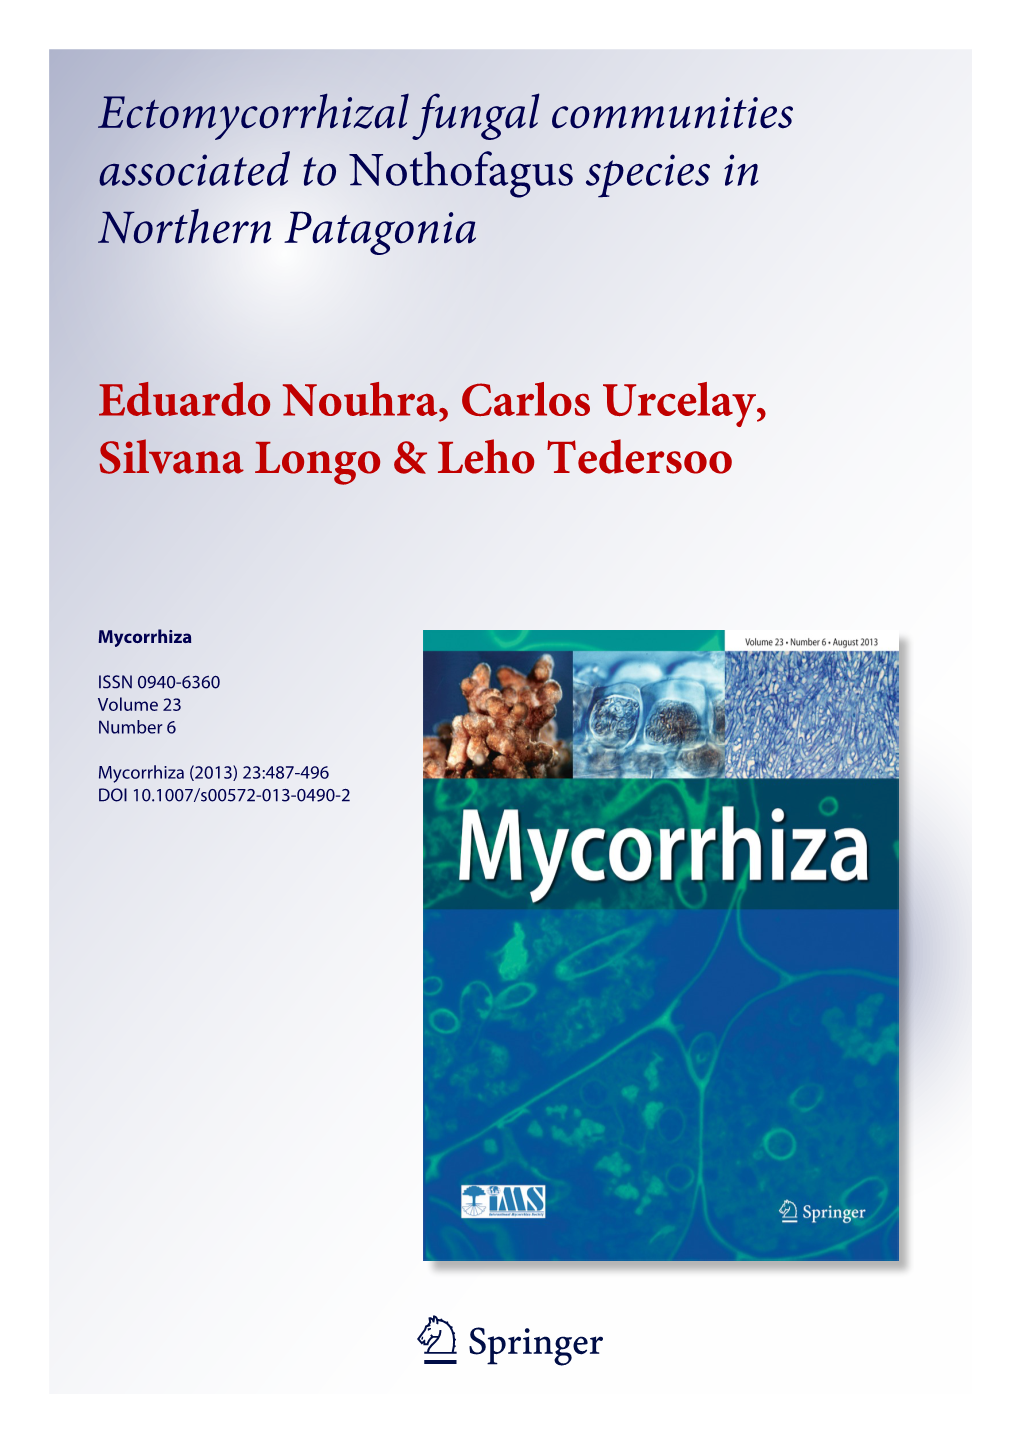 Ectomycorrhizal Fungal Communities Associated to Nothofagus Species in Northern Patagonia